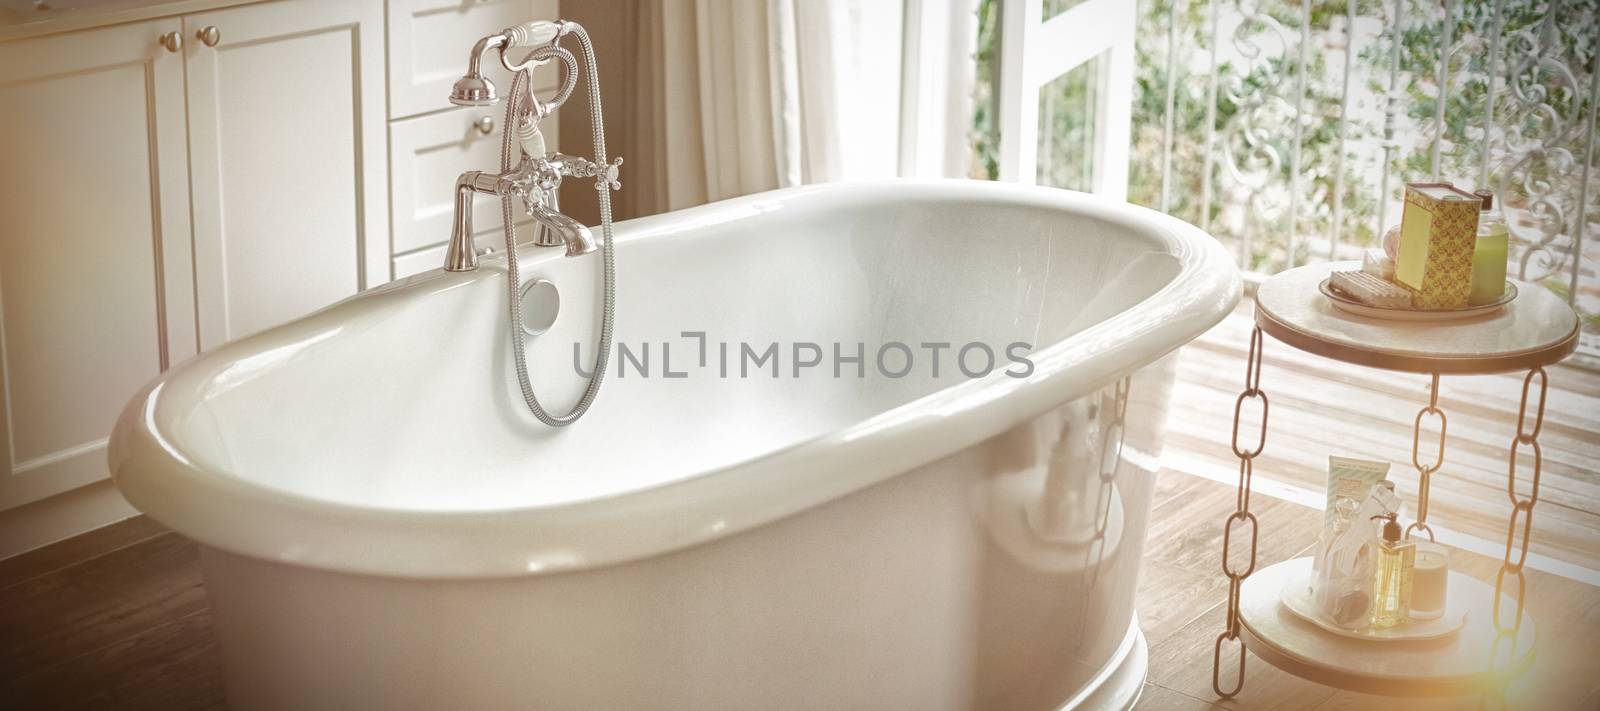 View of empty bathtub in bathroom at home